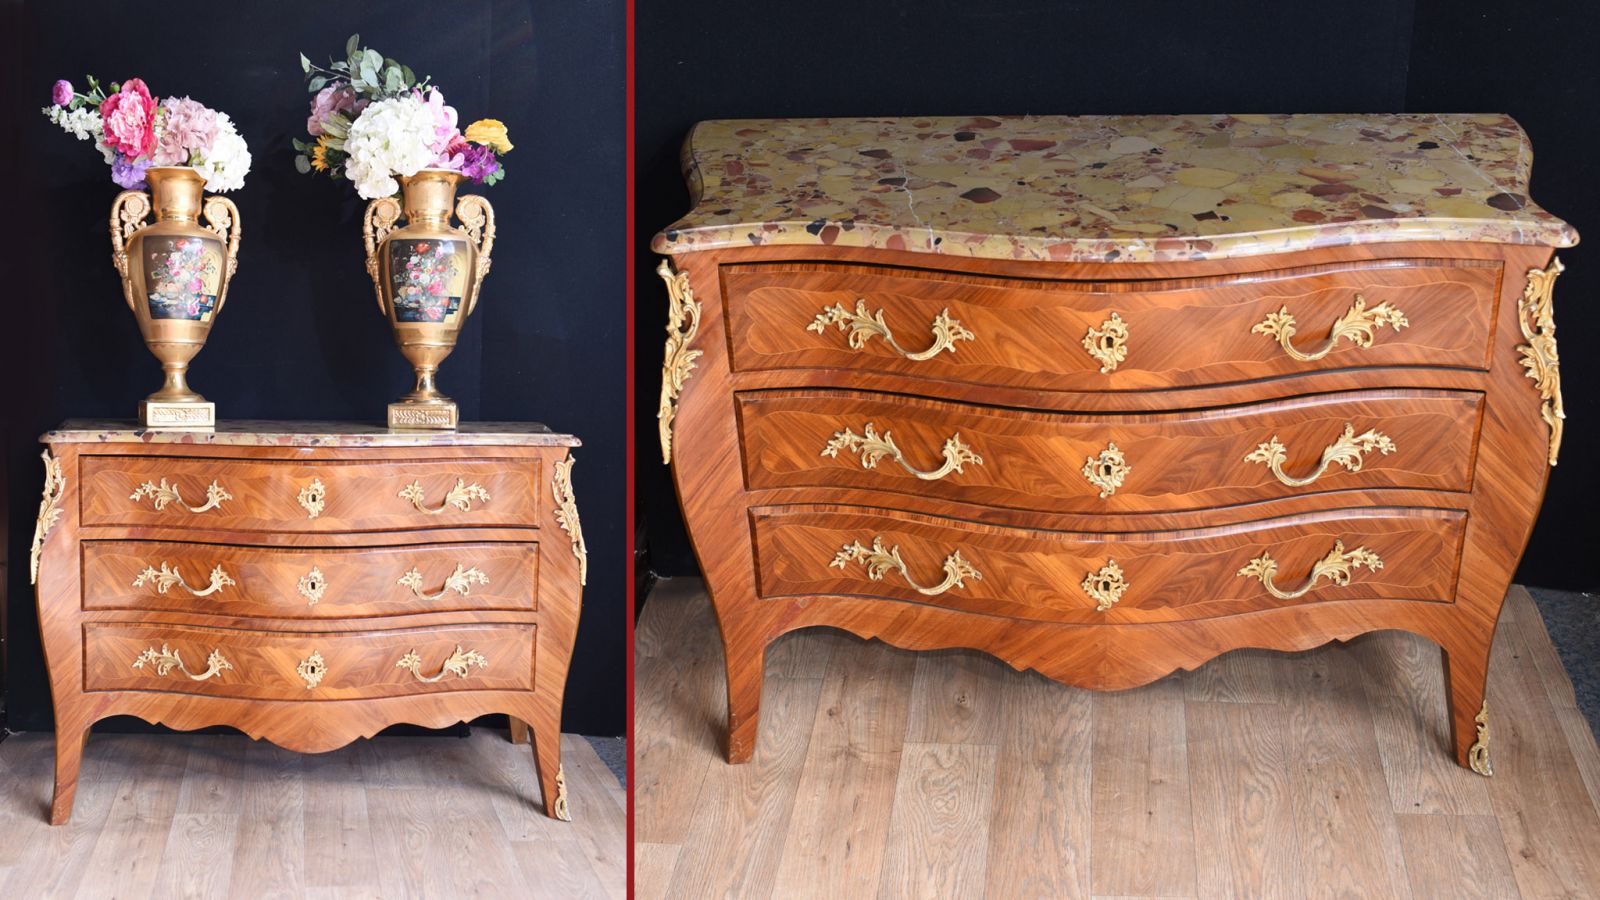 French Chest of Drawers - Antique Kingwood Bombe Commode